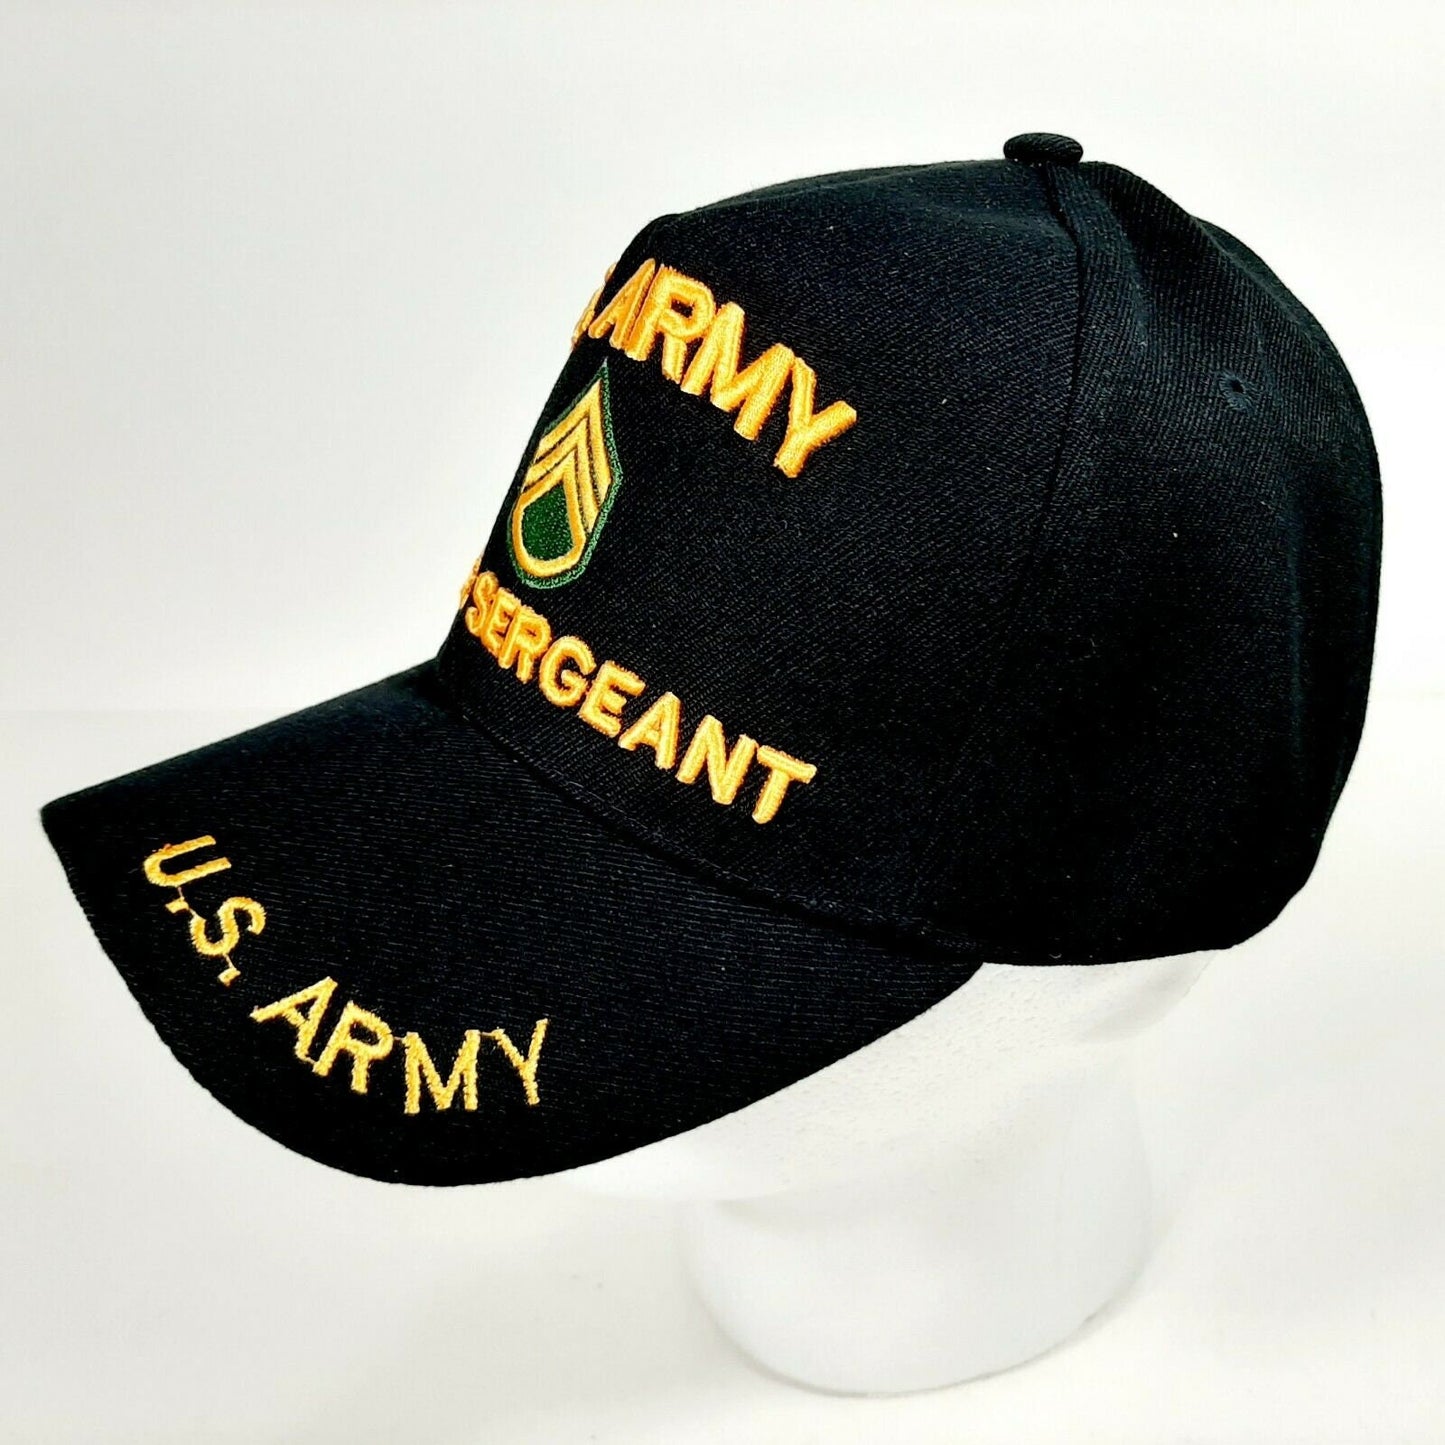 US Army Staff Sergeant Men's Ball Cap Hat Black Embroidered Acrylic